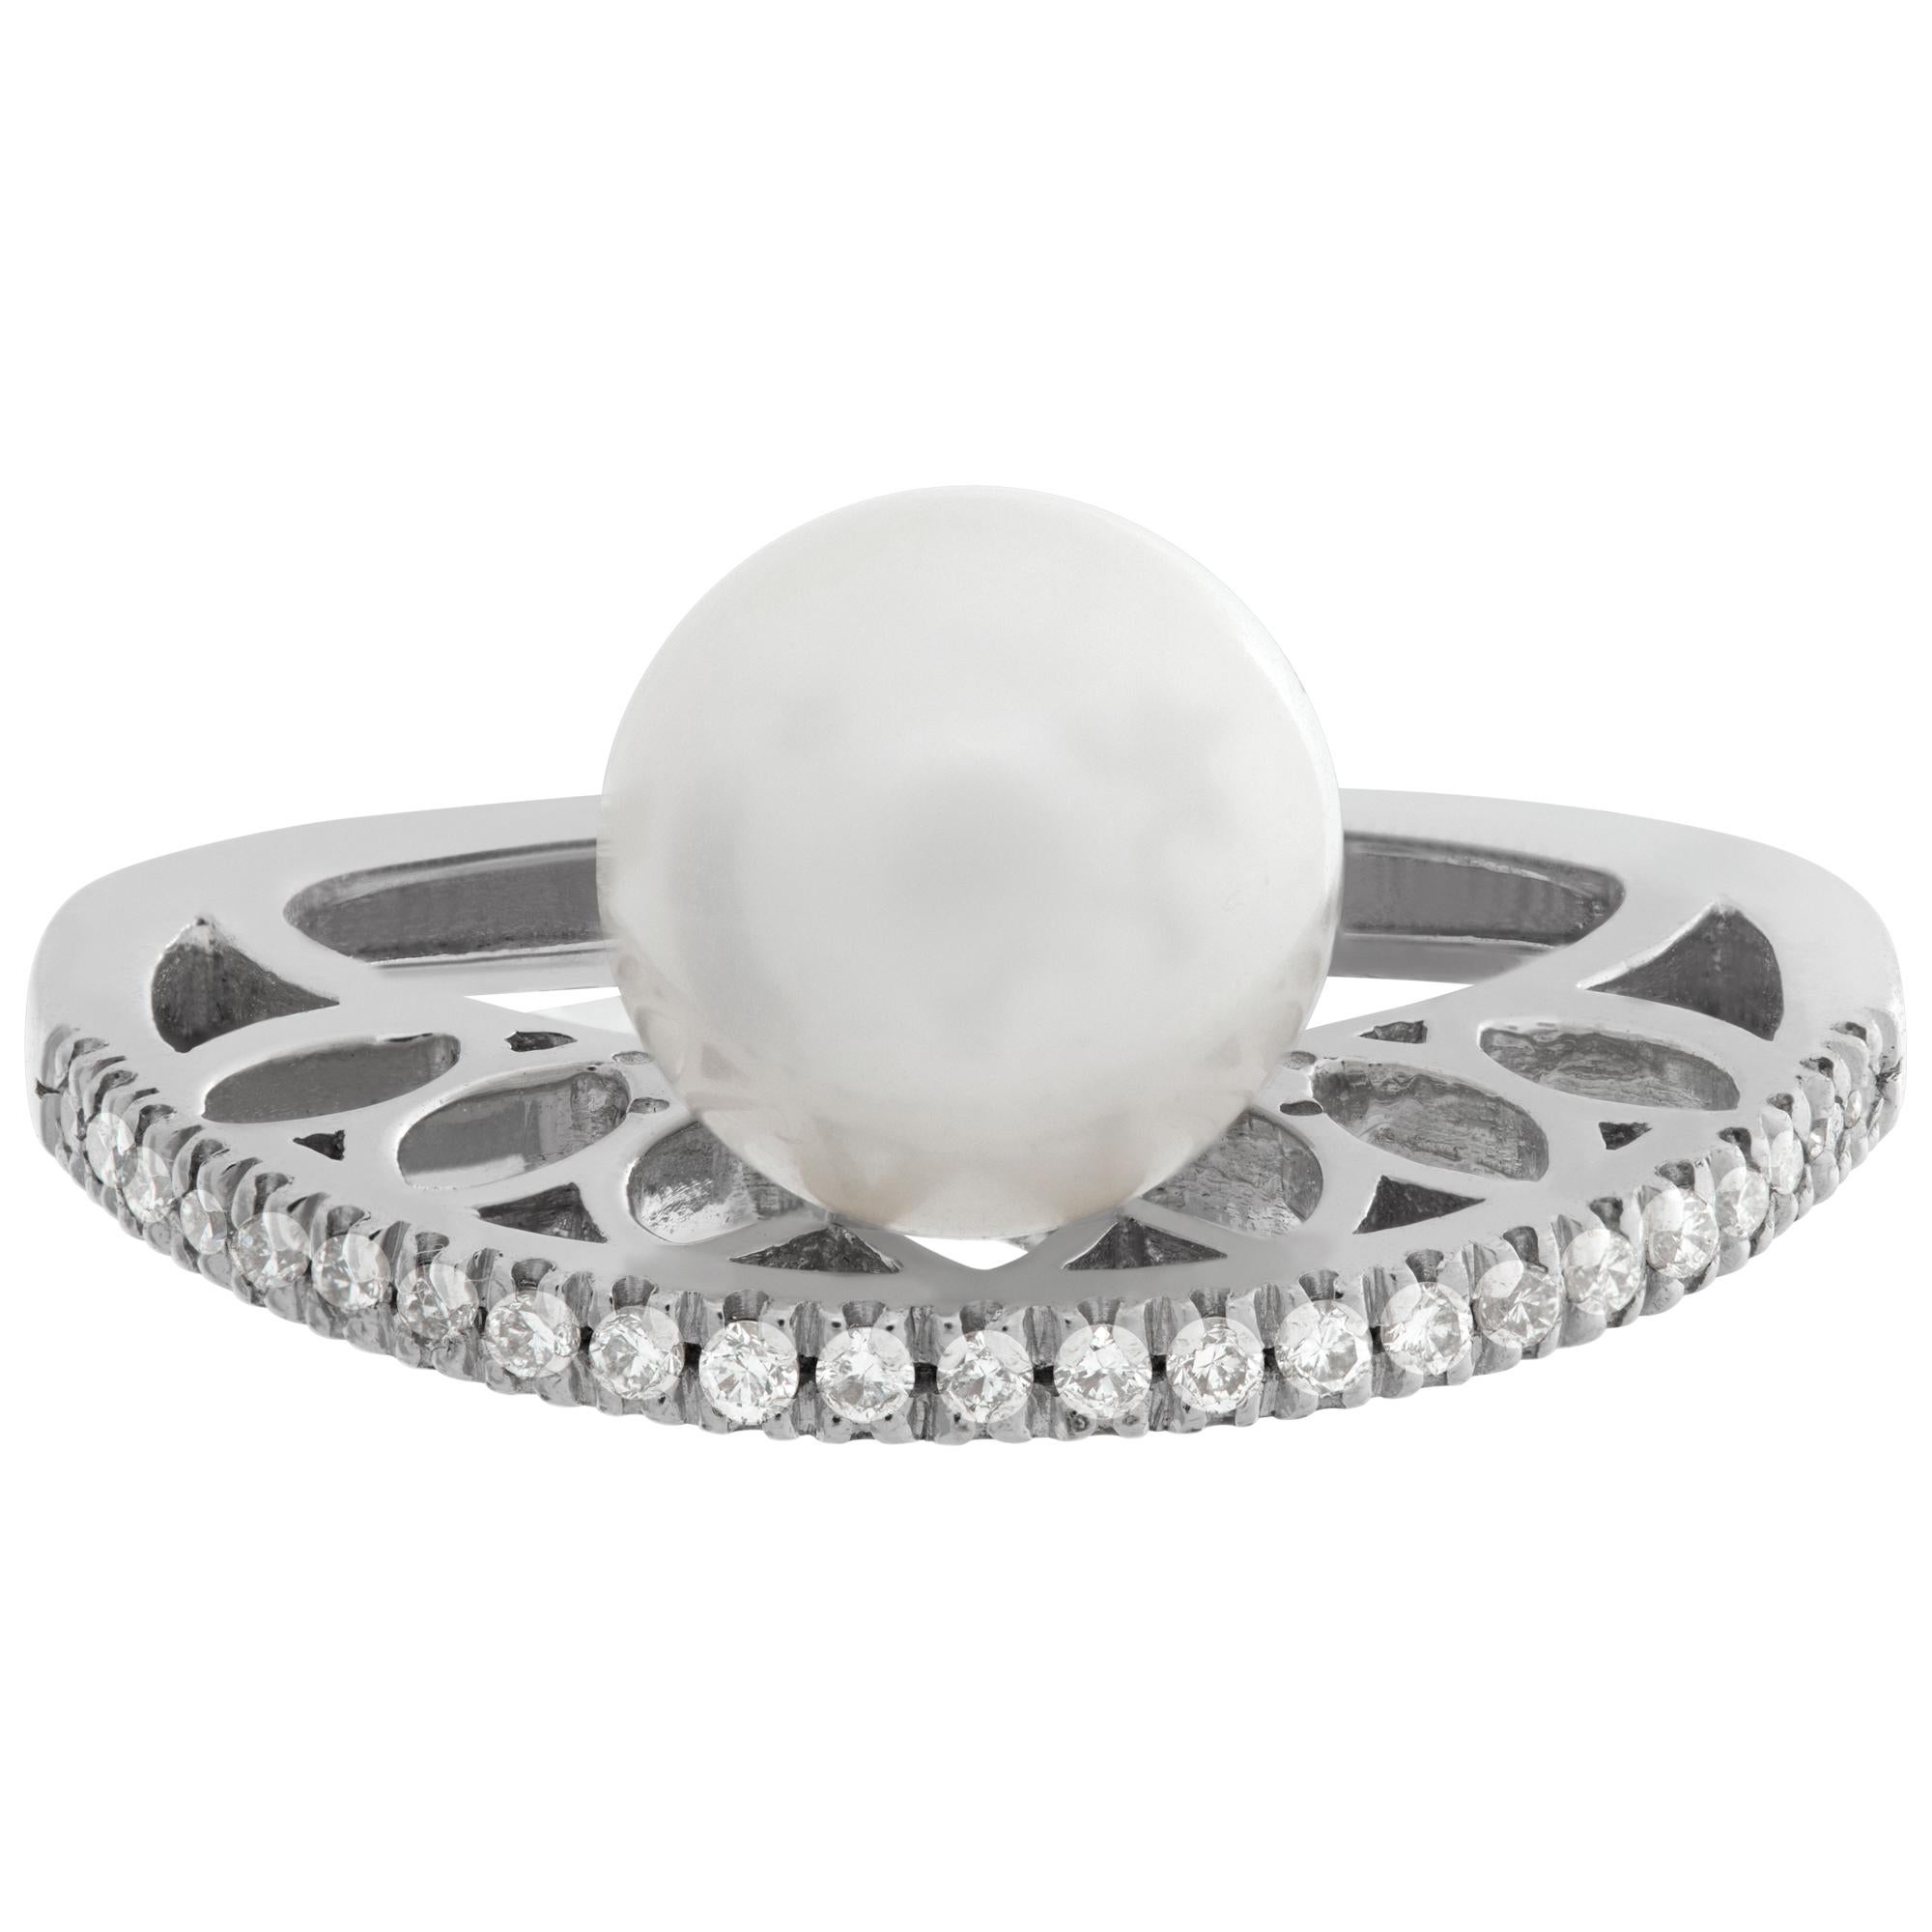 Fresh water pearl (9.5 x10mm) & diamond ring with approx 0.20 carat round cut diamond accents set in 18k white gold. Size 7This Pearl/diamond ring is currently size 7 and some items can be sized up or down, please ask! It weighs 4.5 pennyweights and